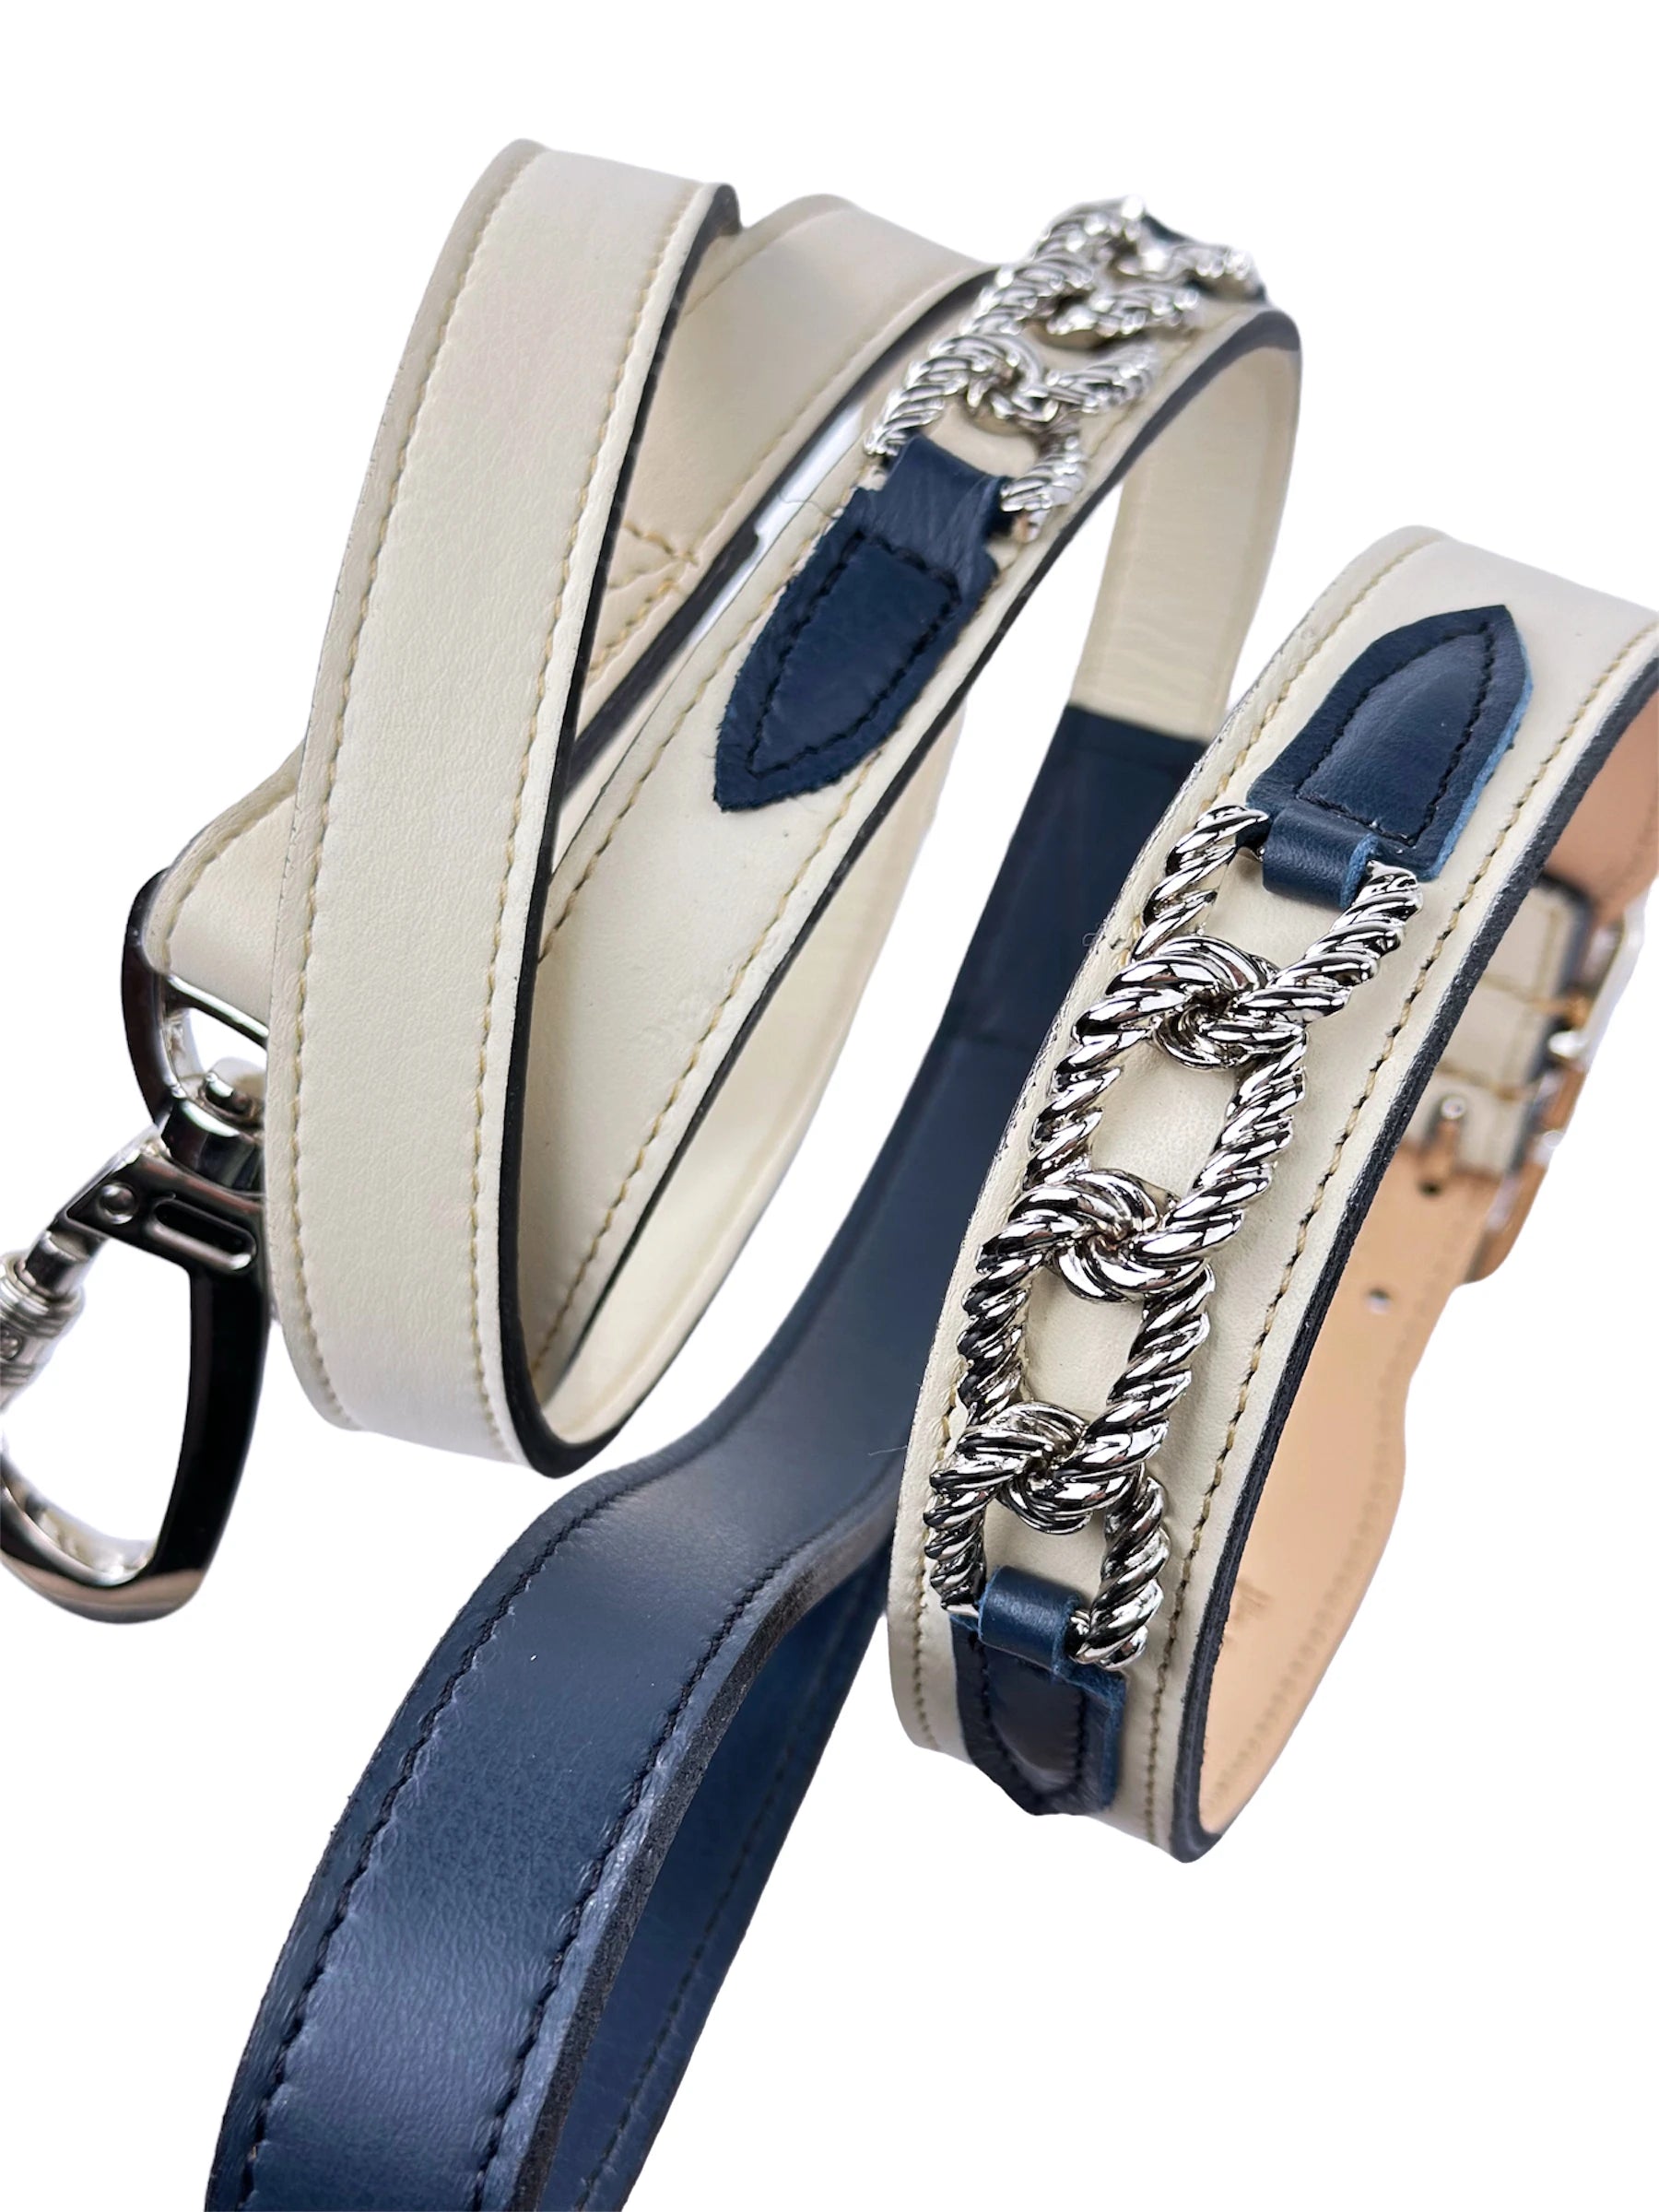 Mayfair Luxury Dog Collar and Leash Collection